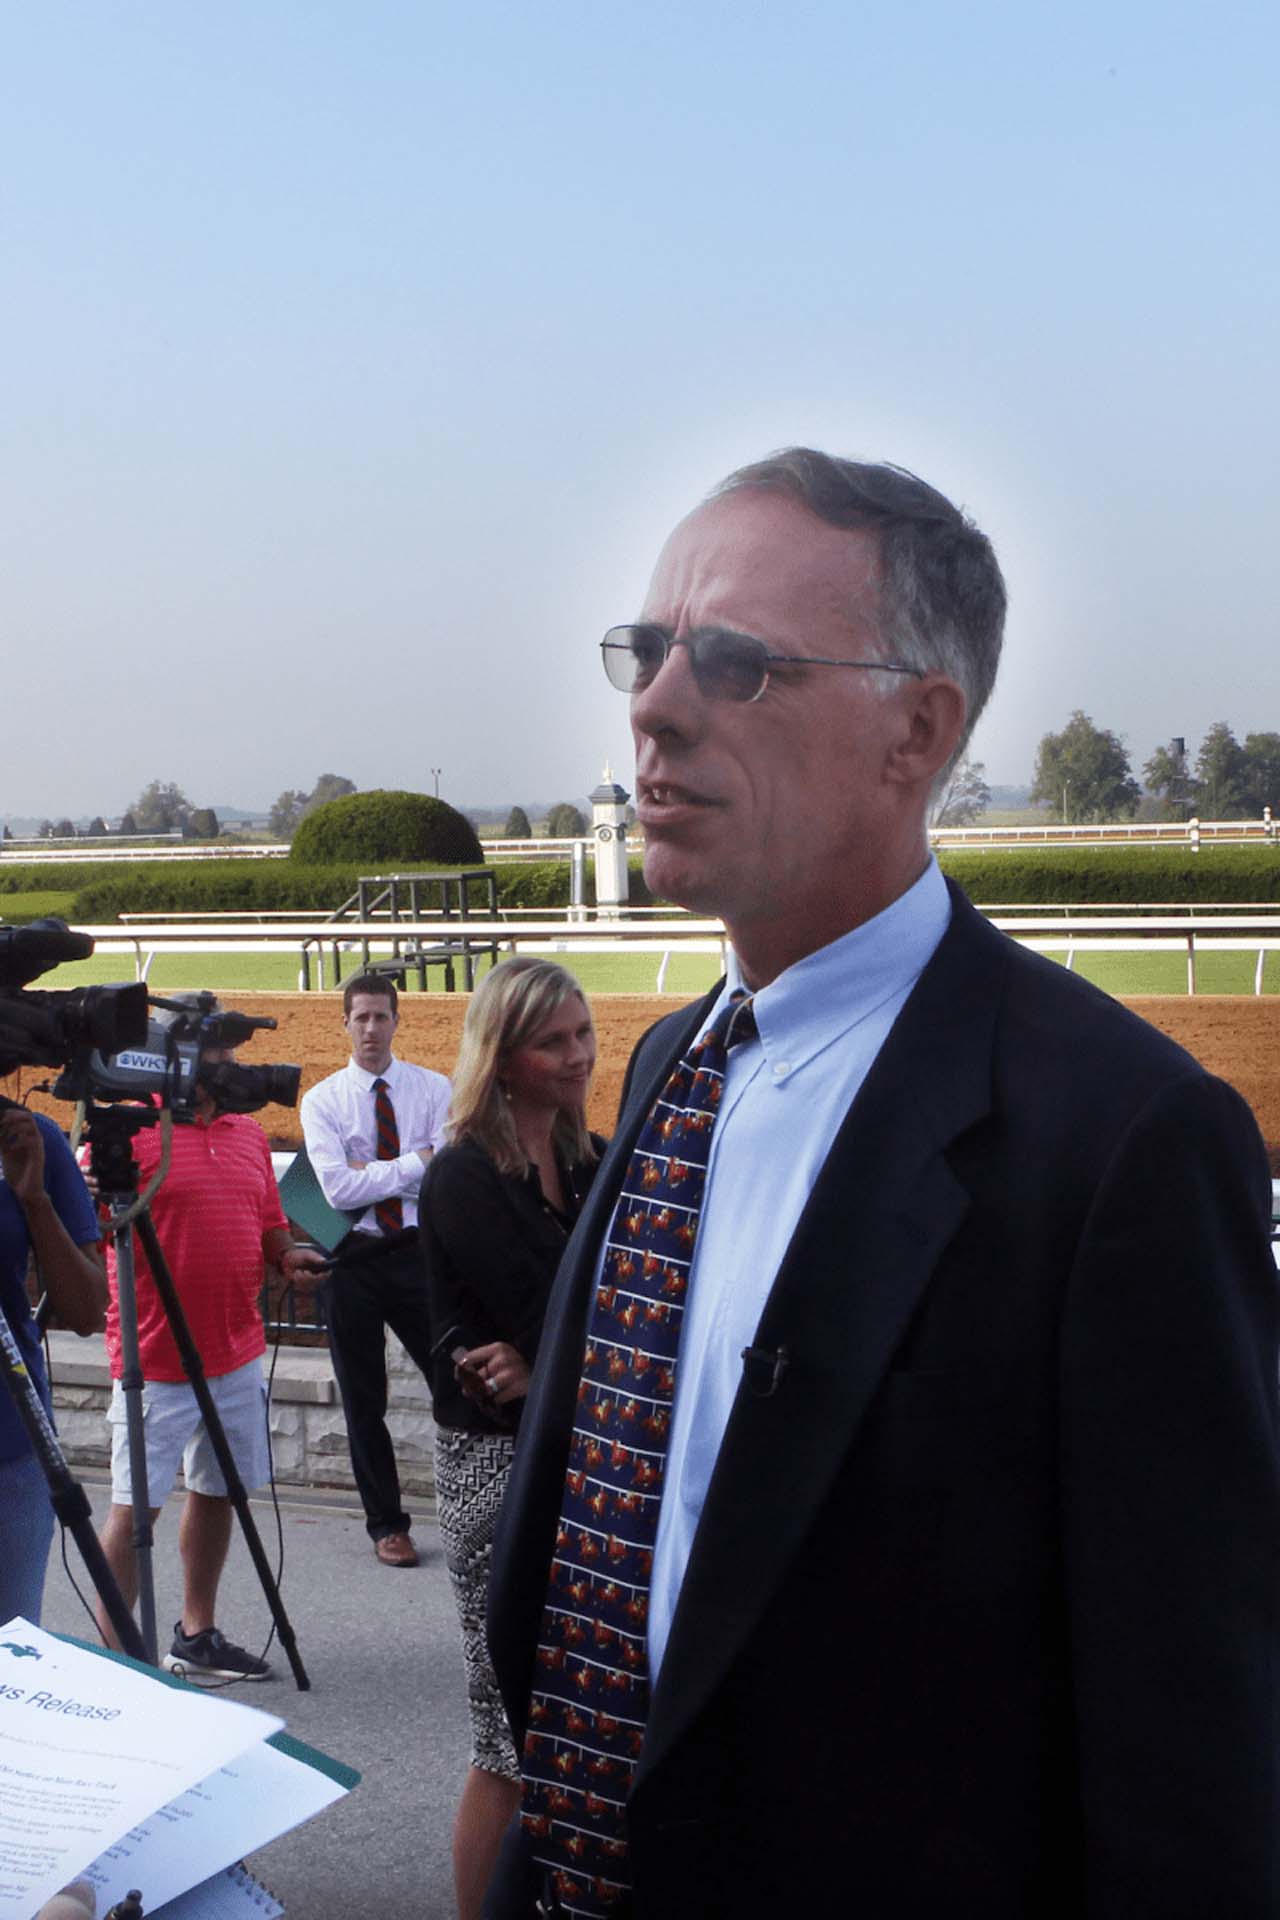 A candid photo of Dr. Mick Peterson giving an interview to an off-screen camera crew. He is an older white man with short gray hair. He is wearing a navy suit jacket over a light blue button-up shirt and a patterned tie. He is also wearing a pair of glasses with color-changing lenses.